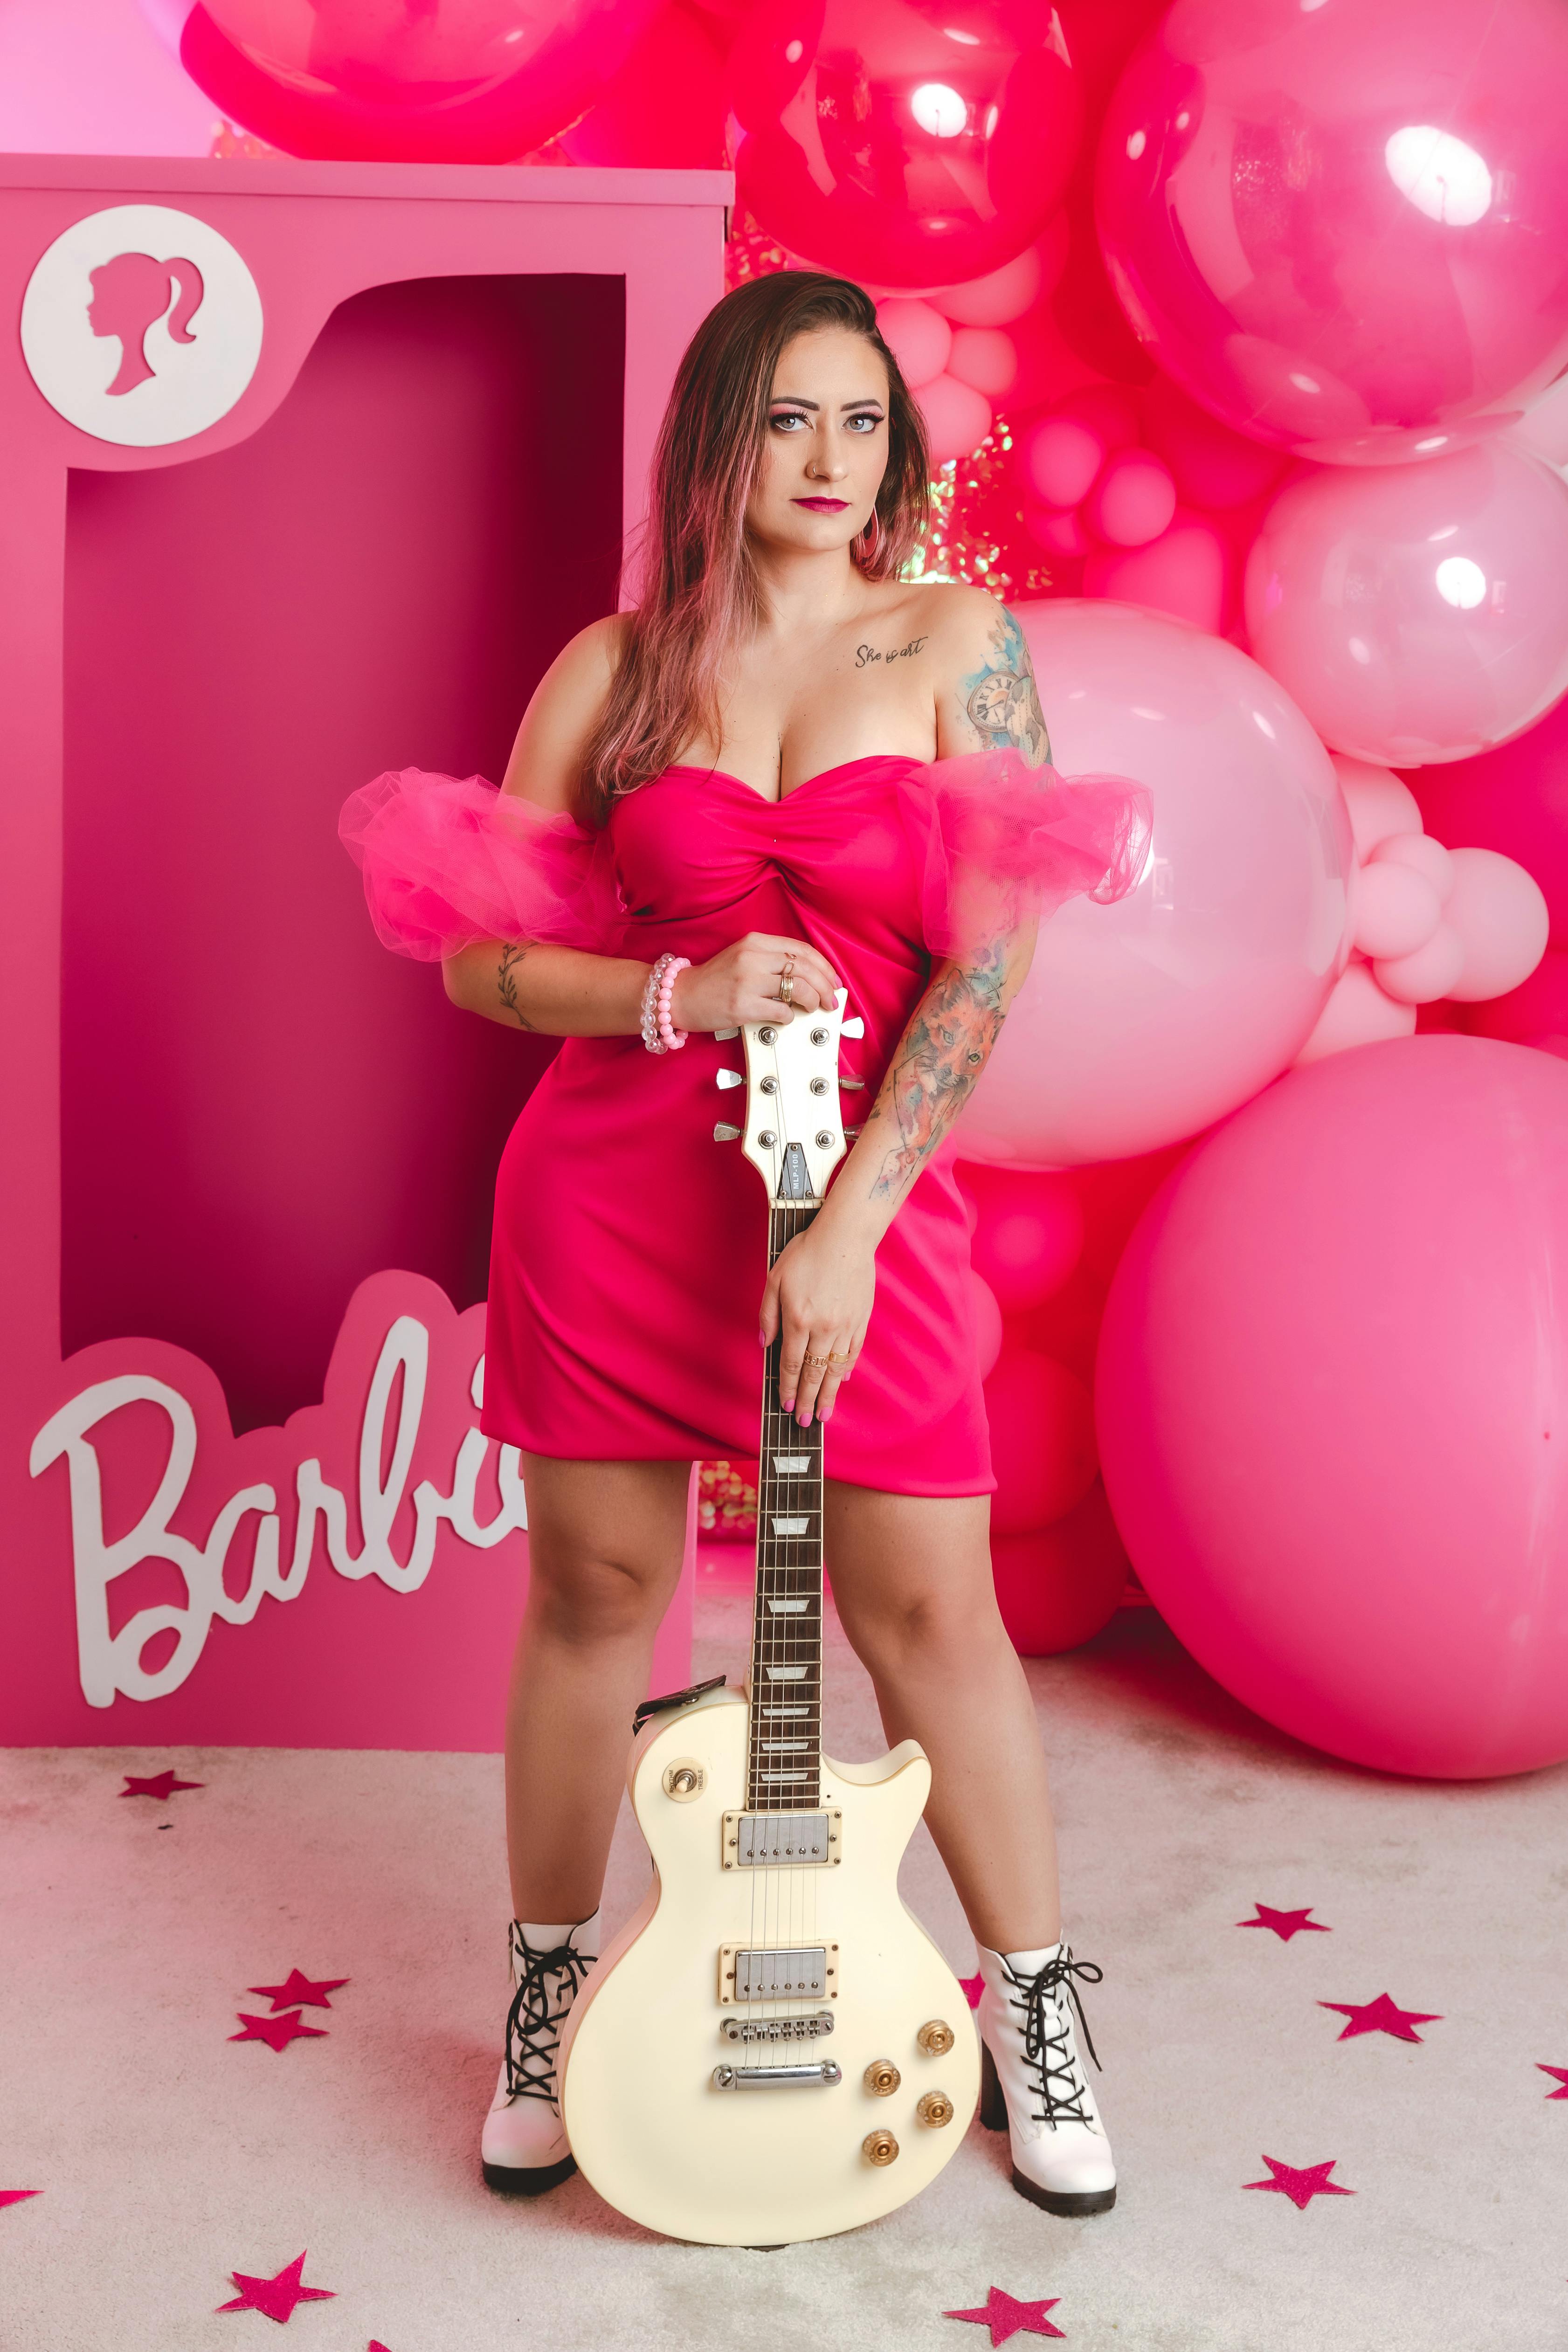 young woman with tattoos holding an electric guitar and standing on the background of pink balloons and a barbie box